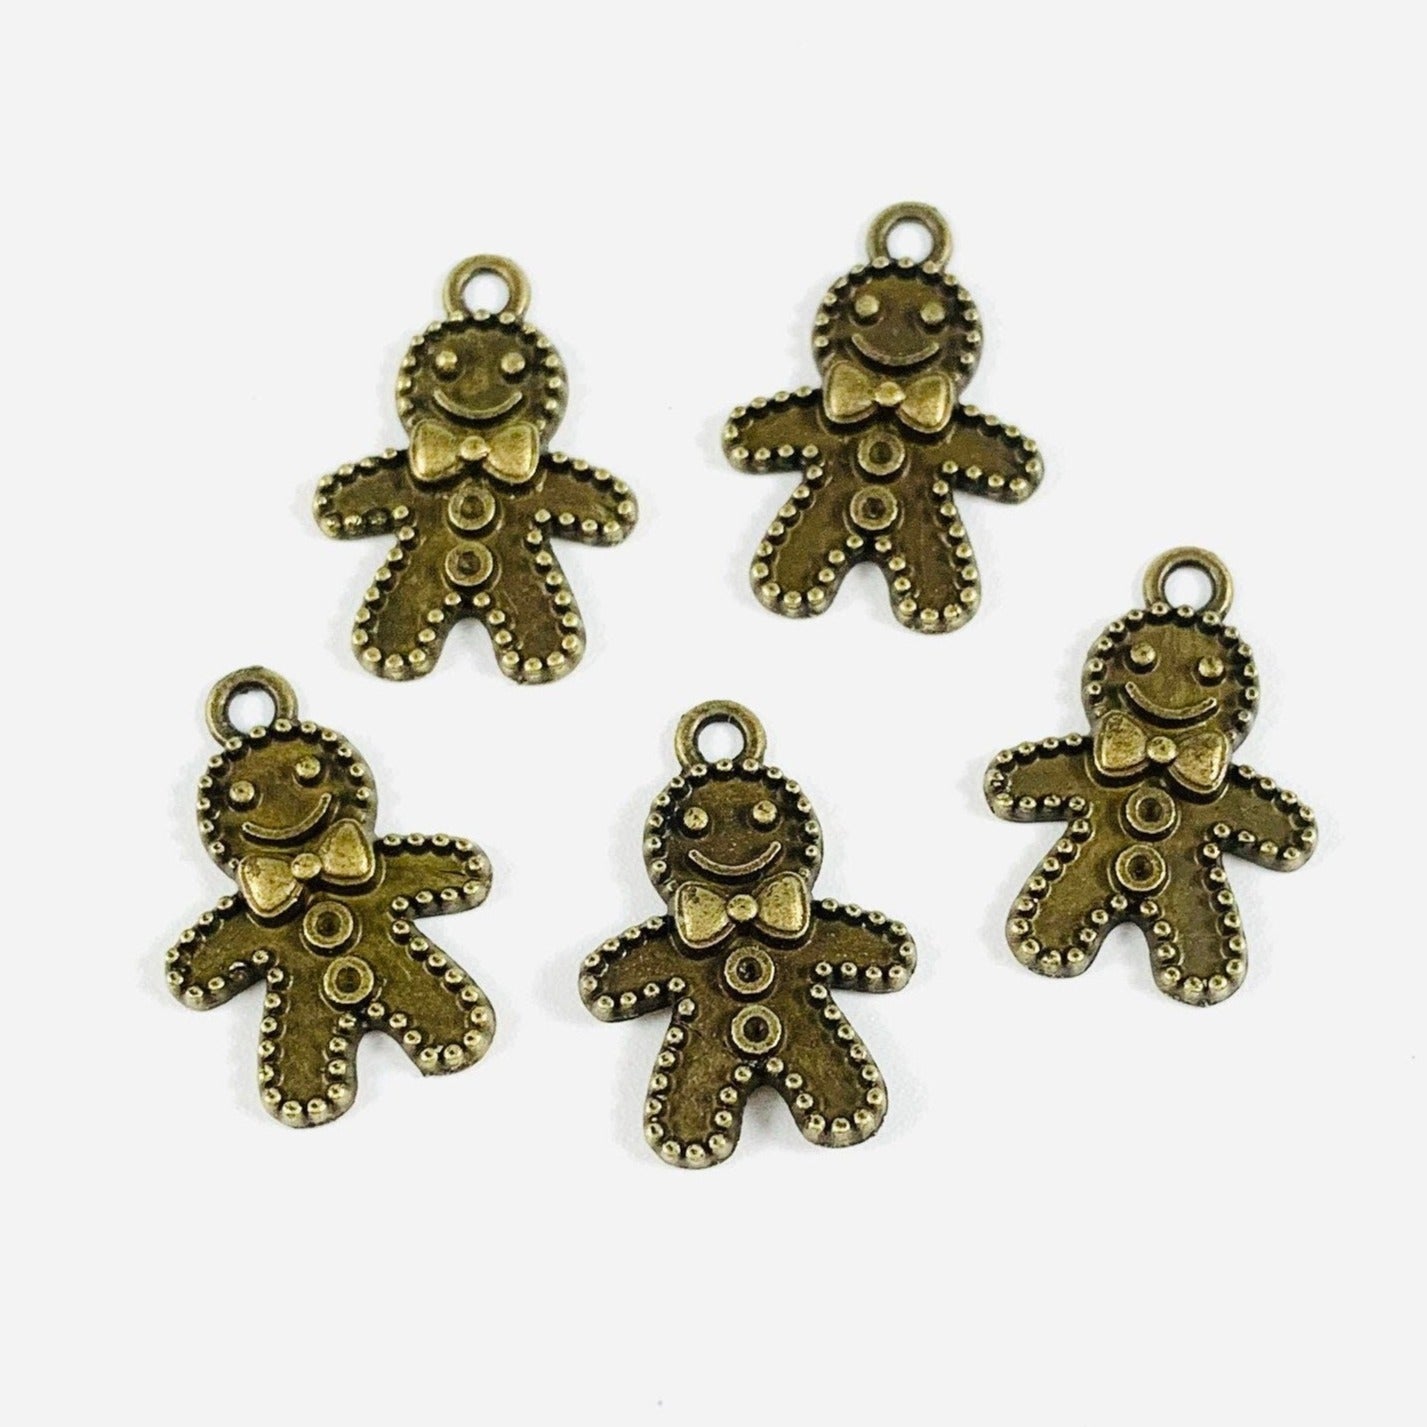 Gingerbread Man Charms - Bronze Finish